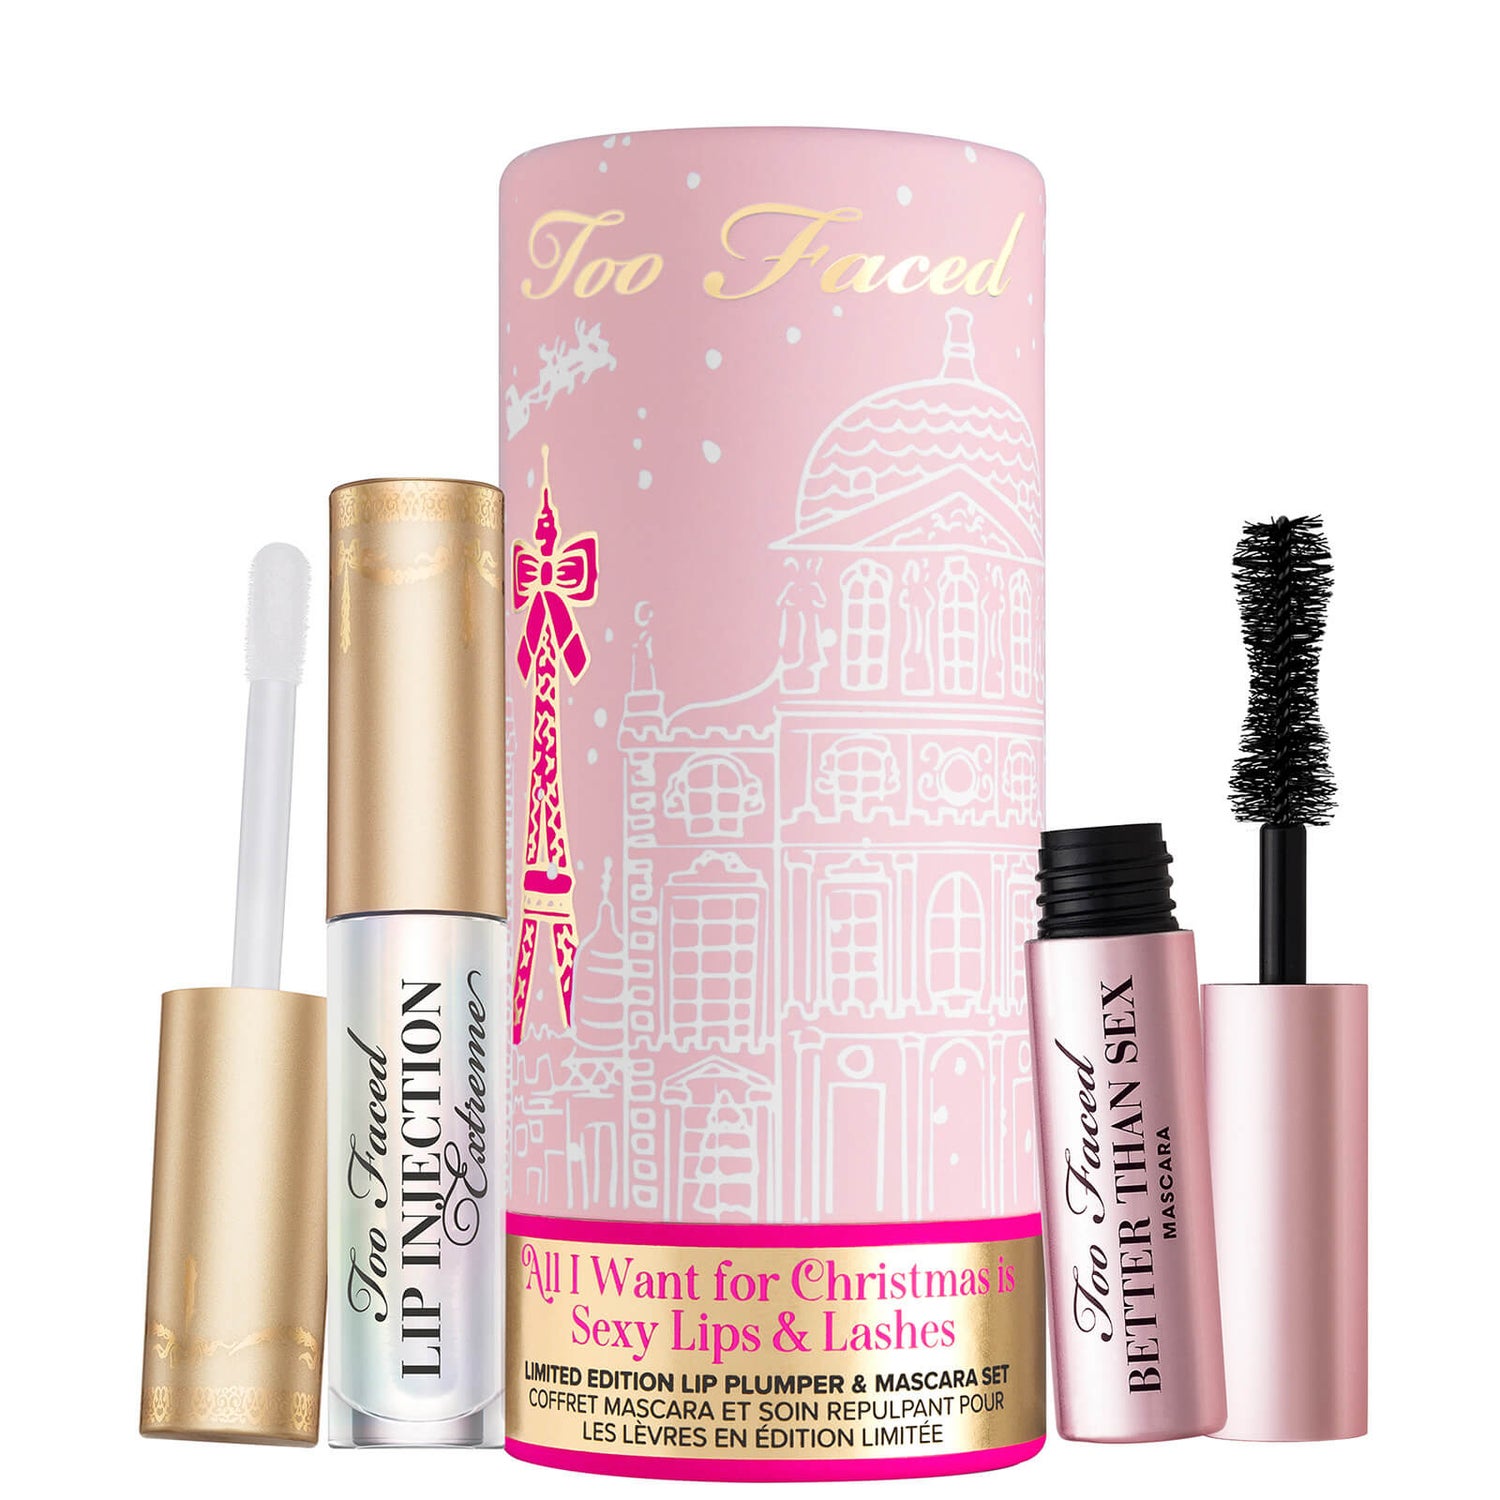 Too Faced Limited Edition All I Want for Christmas Are Sexy Lips and Lashes Set (Worth £24.00)